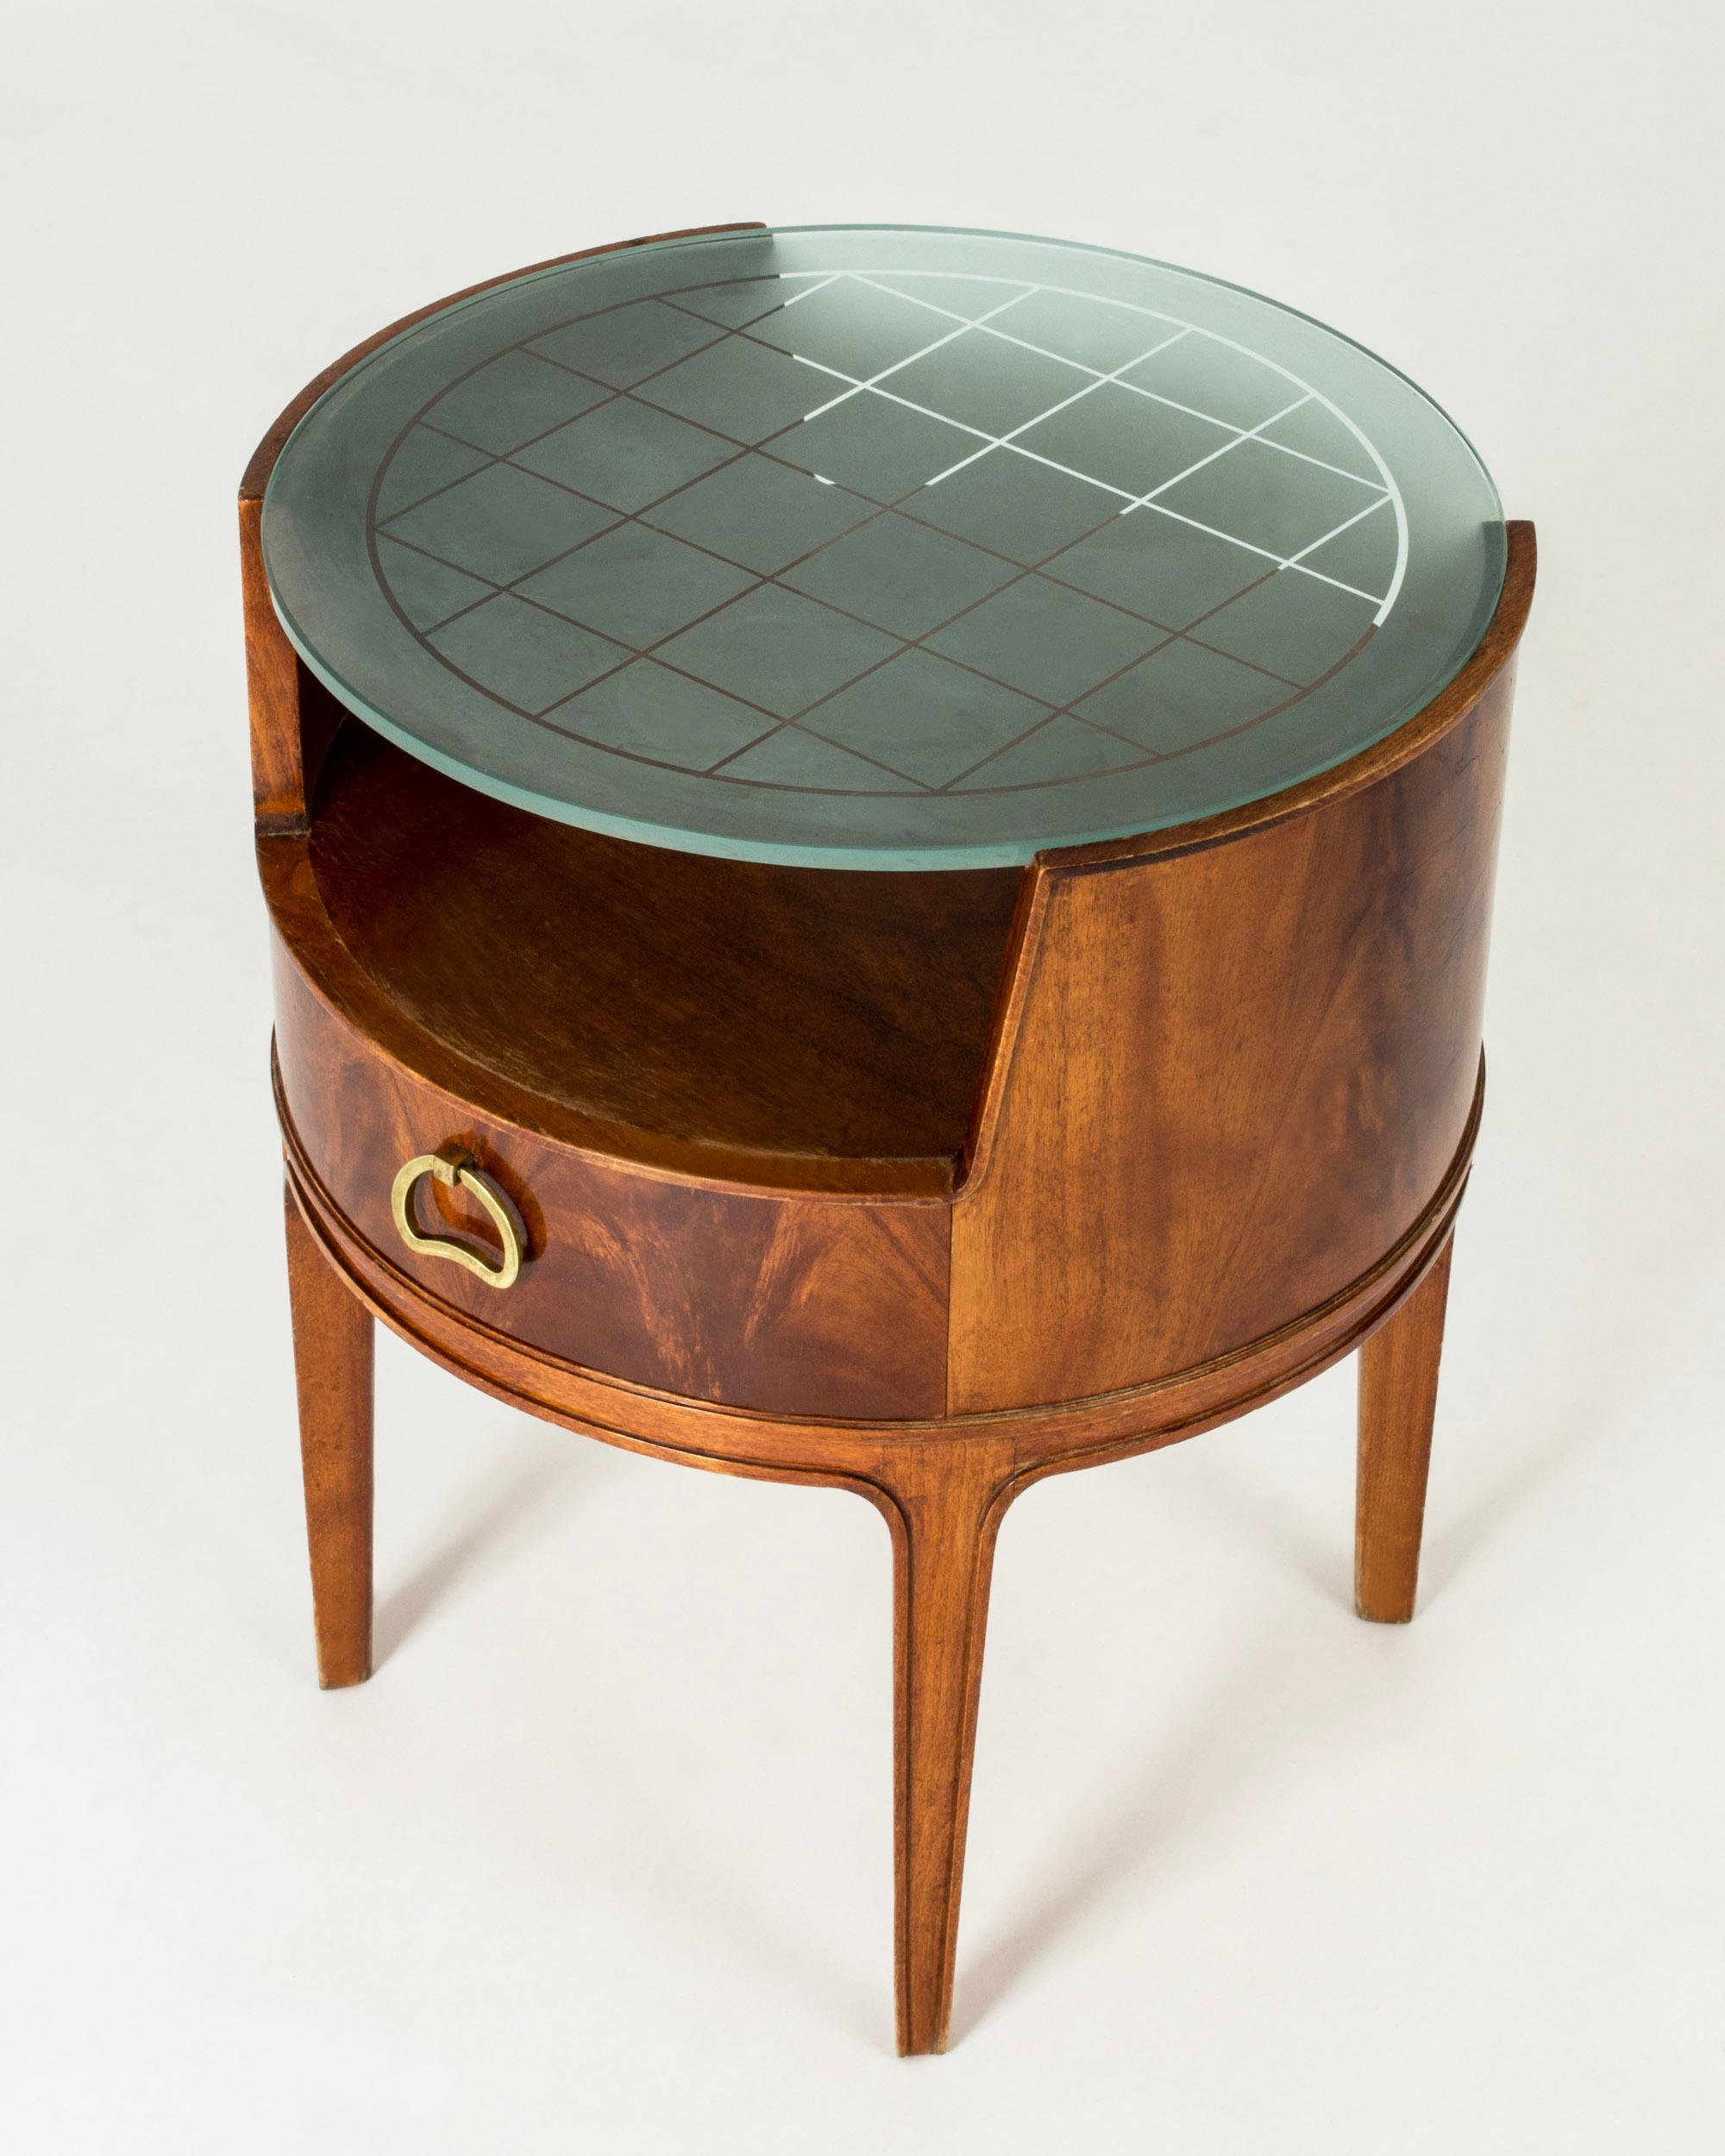 Swedish Midcentury Modern Mahogany Side Tables by Axel Larsson, Sweden, 1940s